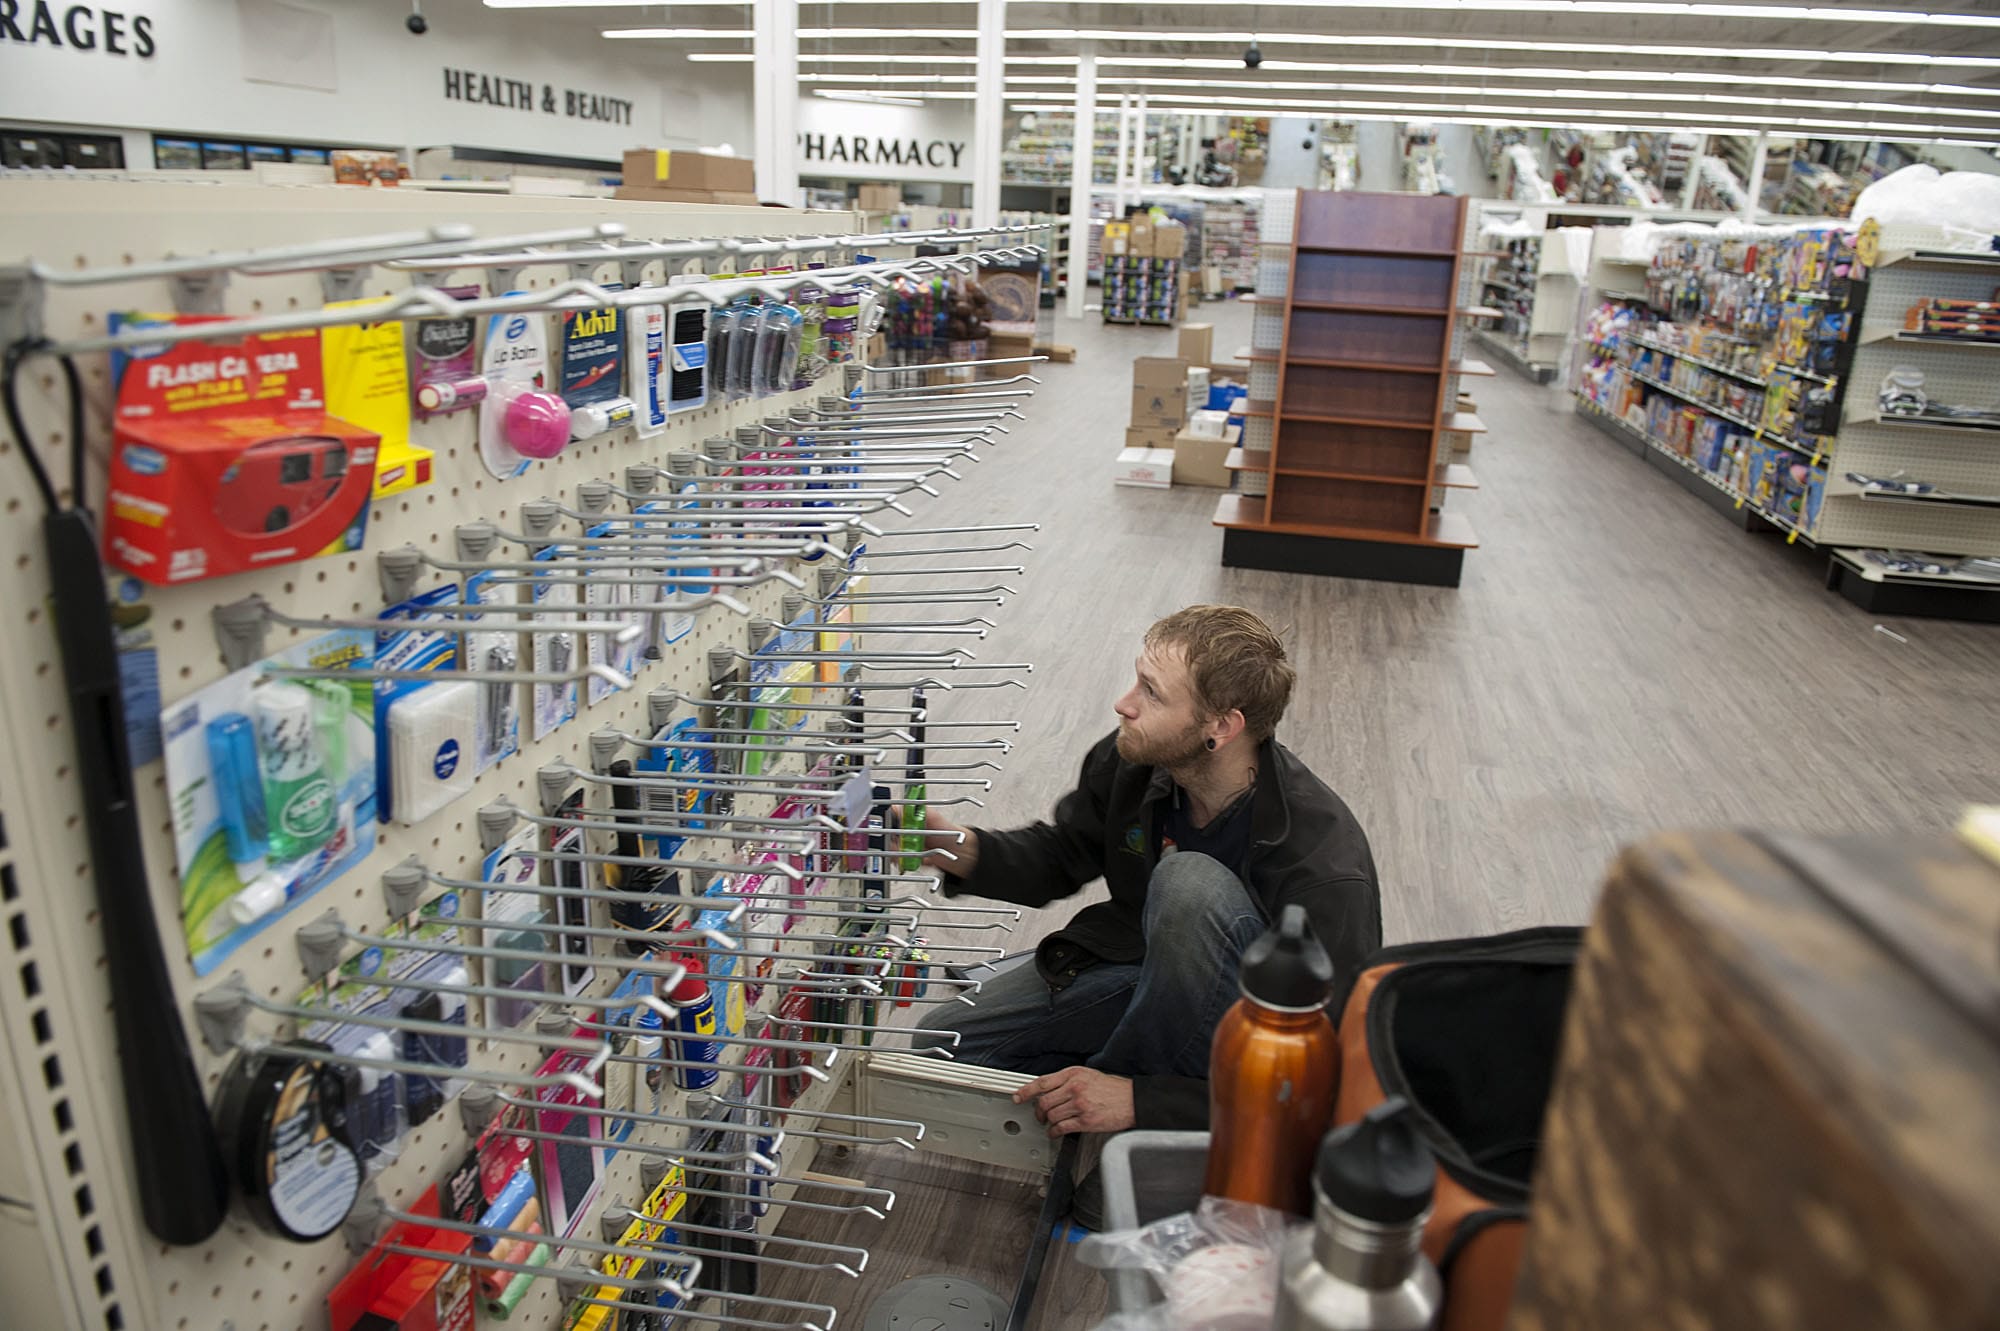 Eric Burgstahler of a Hi-School Pharmacy helps set up a display for merchandise at the company’s new store in the Minnehaha area. The store is set to open Sept. 20, more than a dozen years after Hi-School Pharmacy sold its Clark County stores.